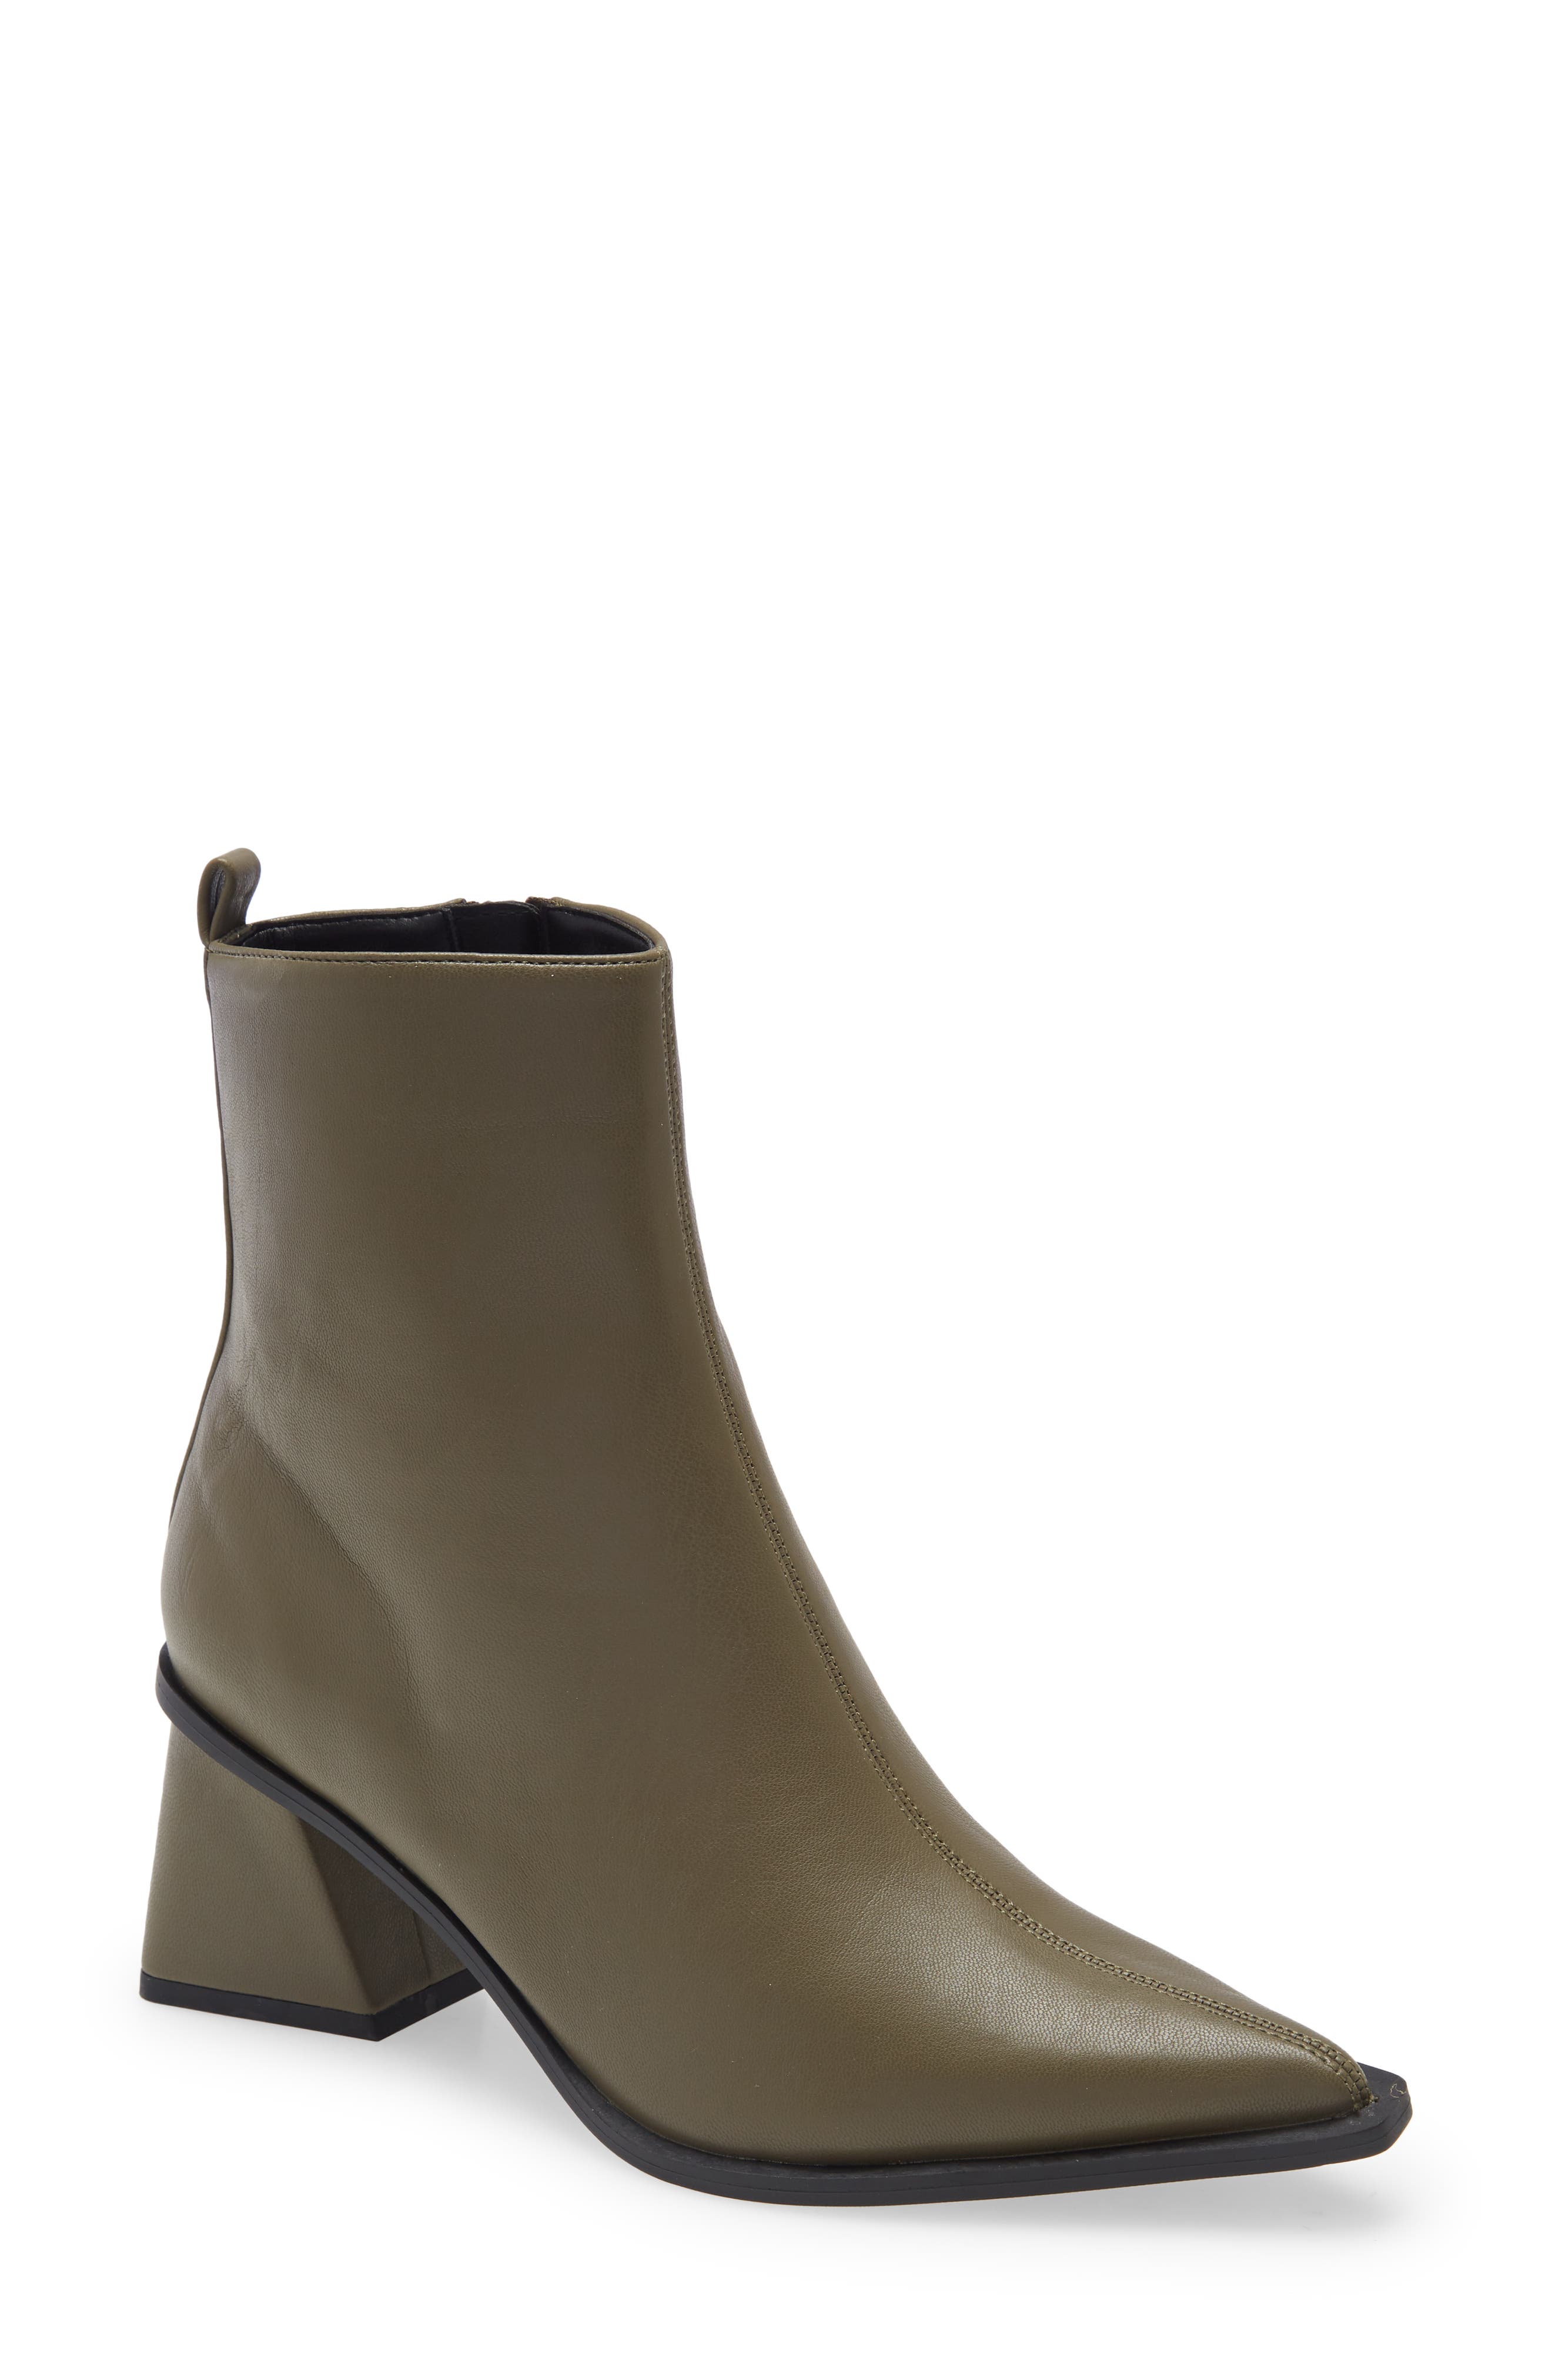 TOPSHOP BRONX POINTY TOE BOOTIE,5045434339840